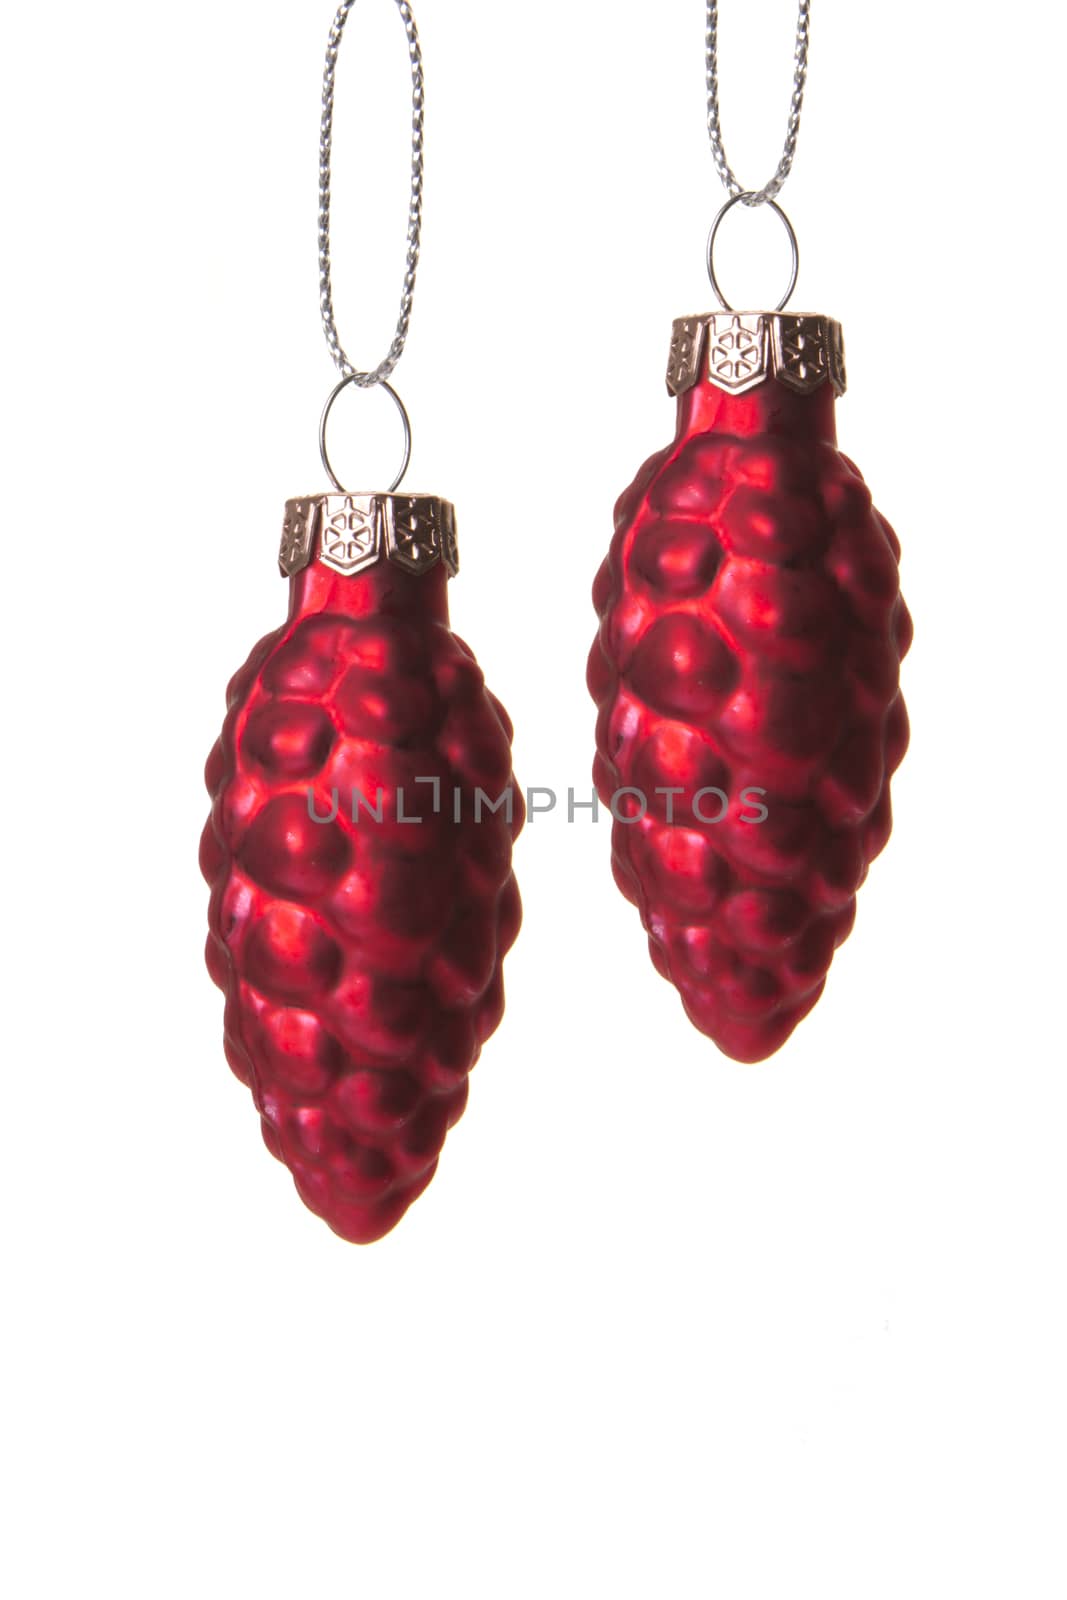 red christmas balls, form pine cone hanging isolated with white background 